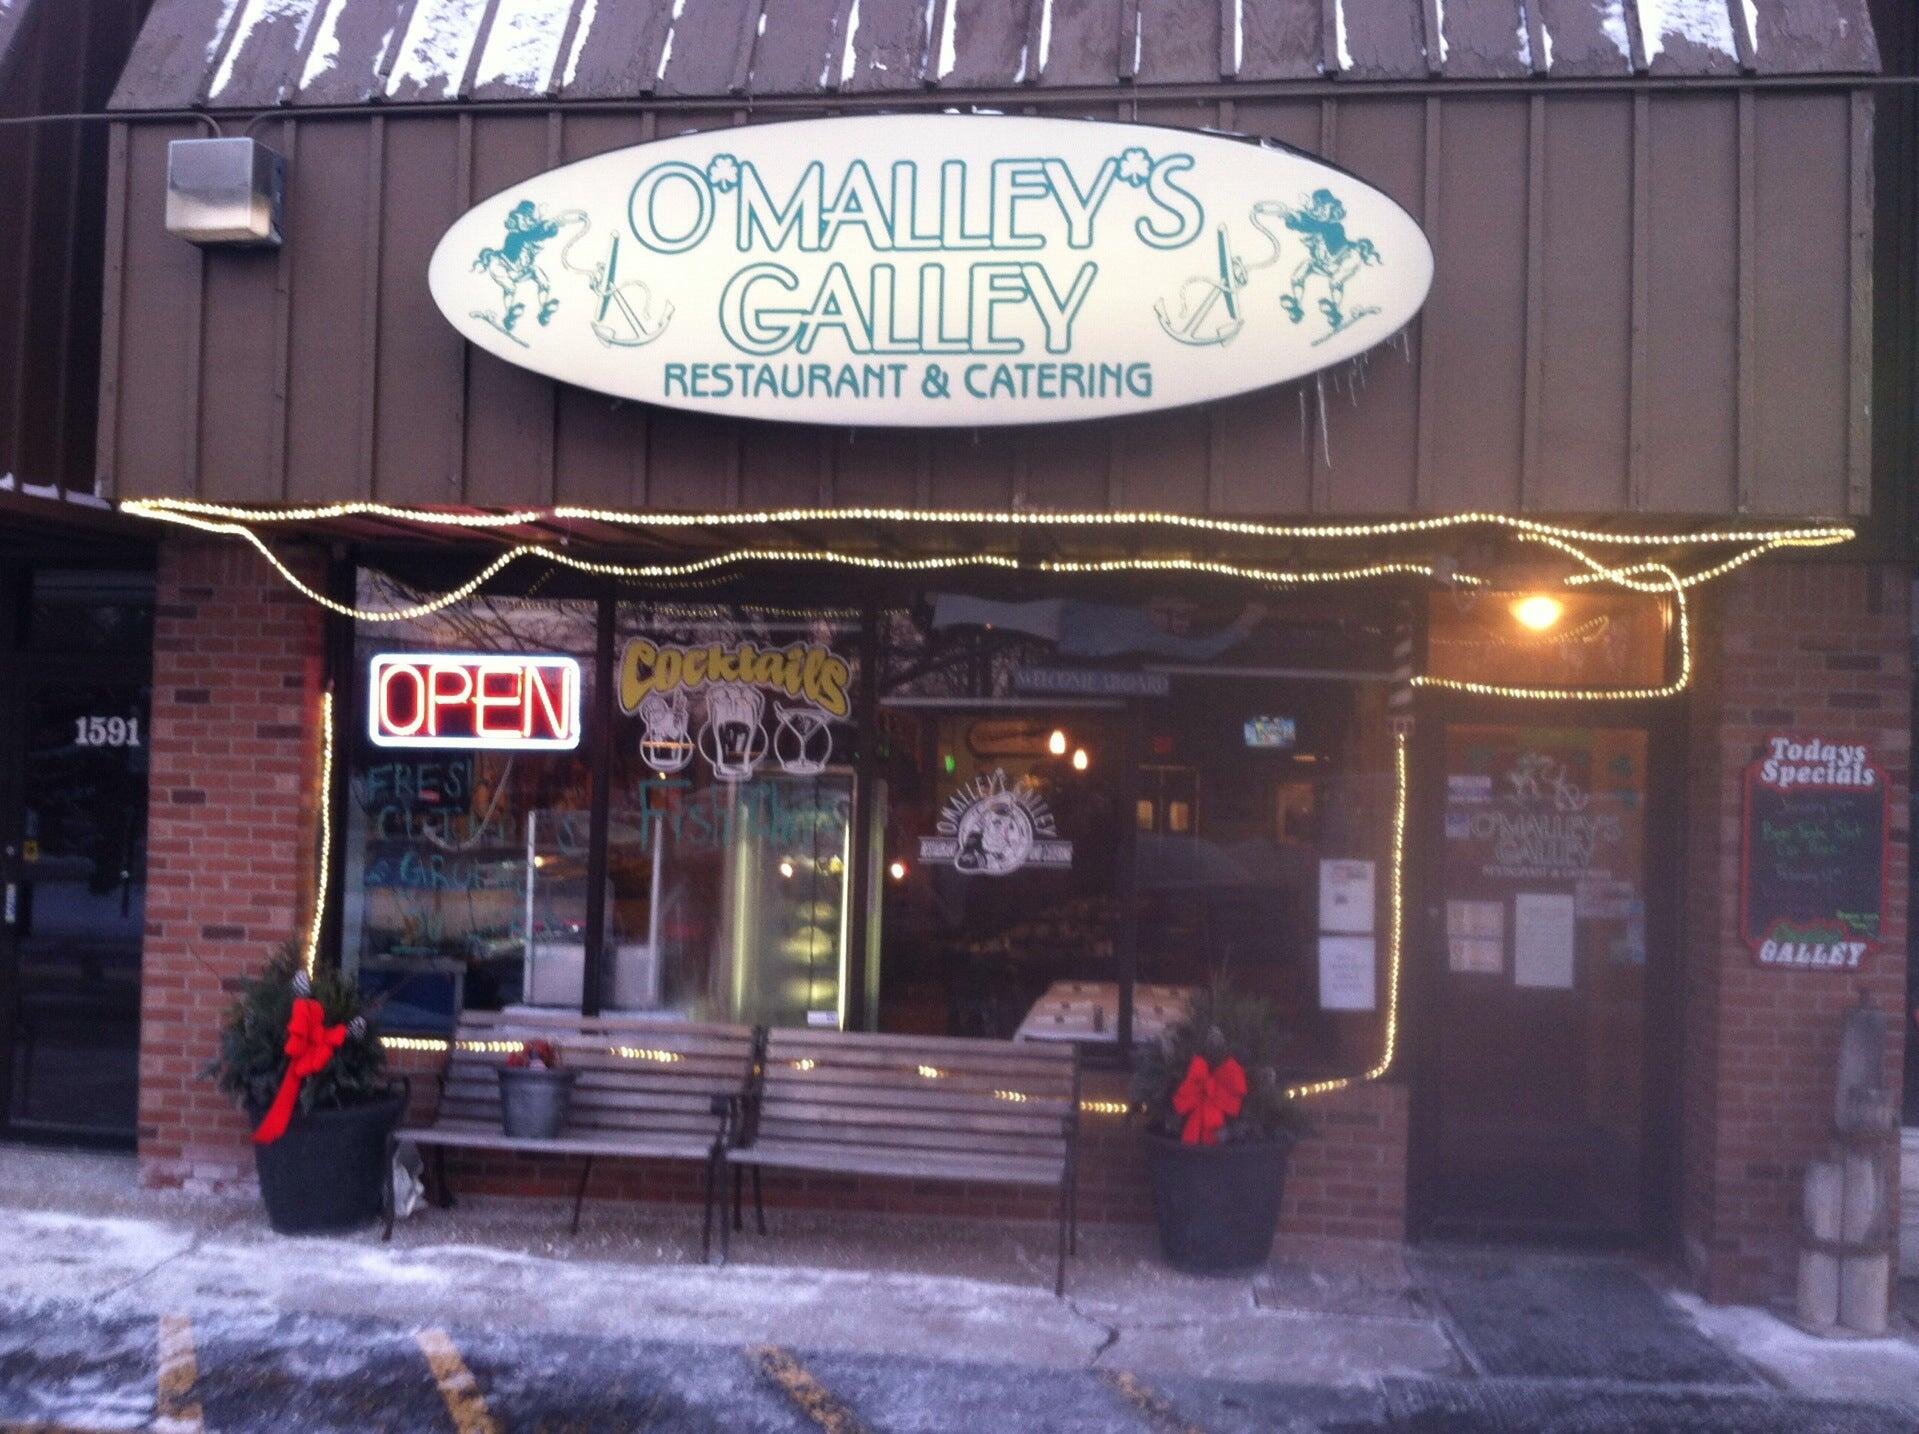 O'Malley's Galley Restaurant & Catering